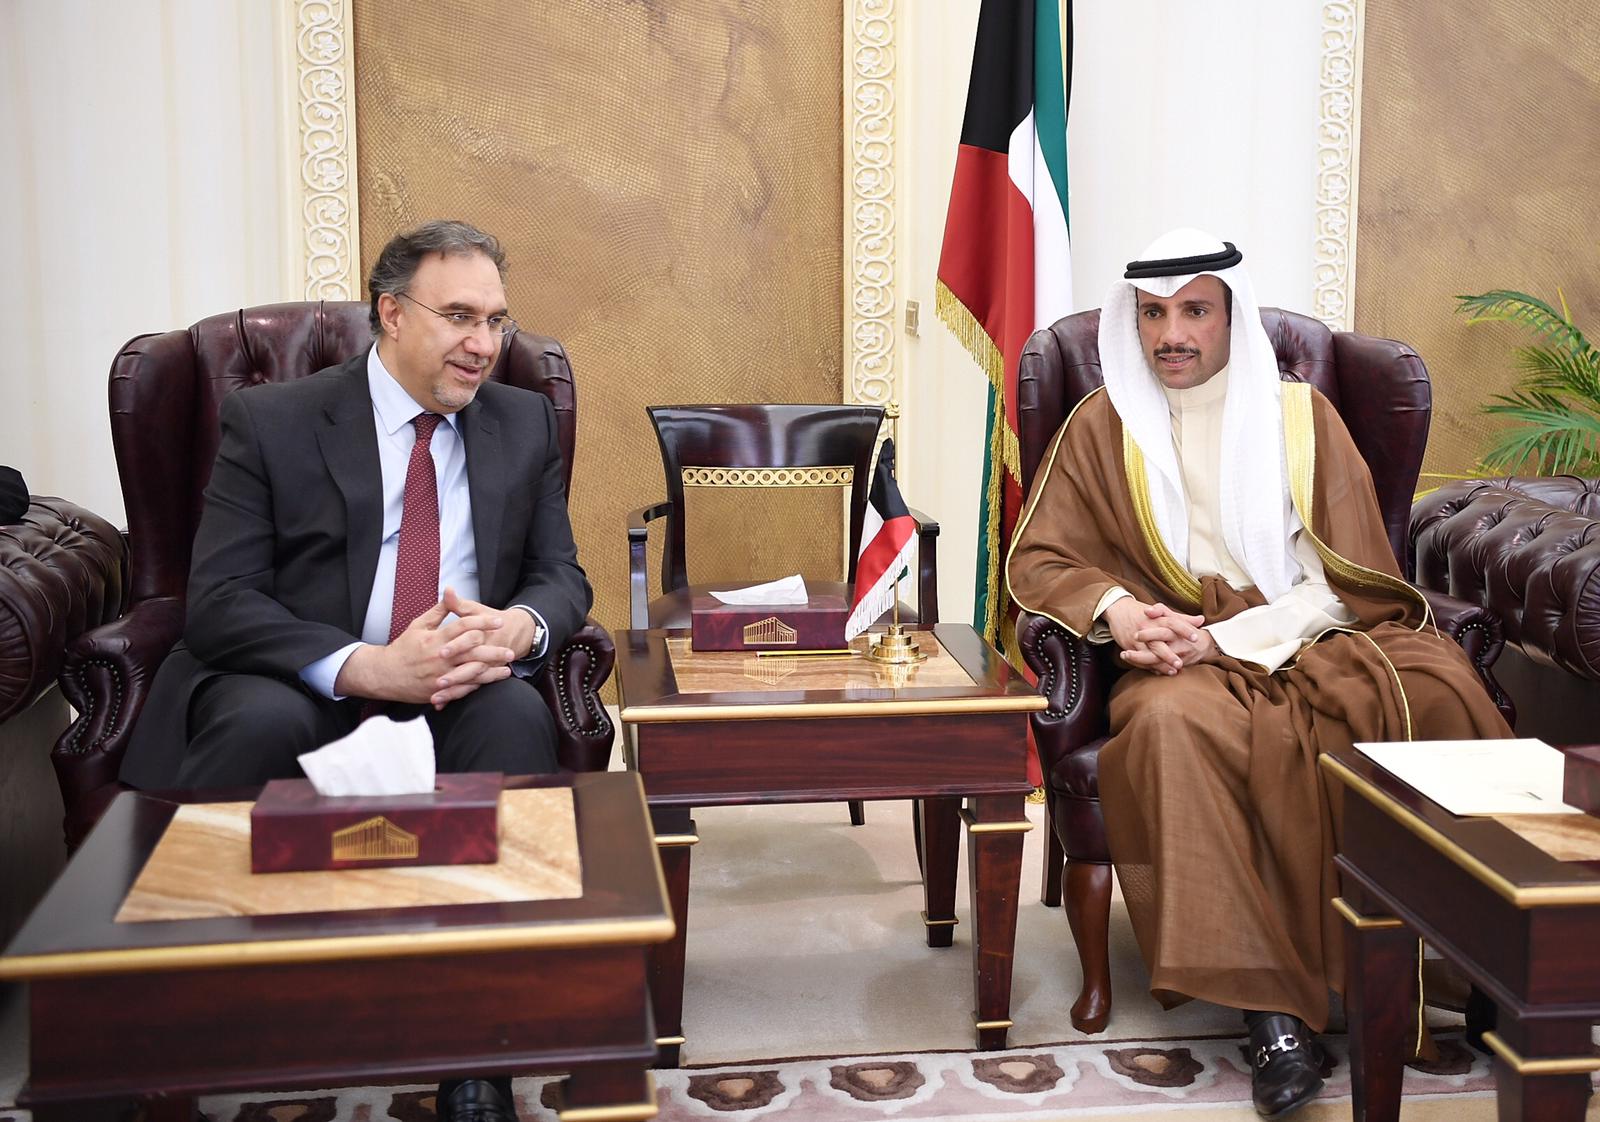 National Assembly Speaker Marzouq Ali Al-Ghanim received Iraqi Minister of Electricity Dr. Louay Al Khateeb